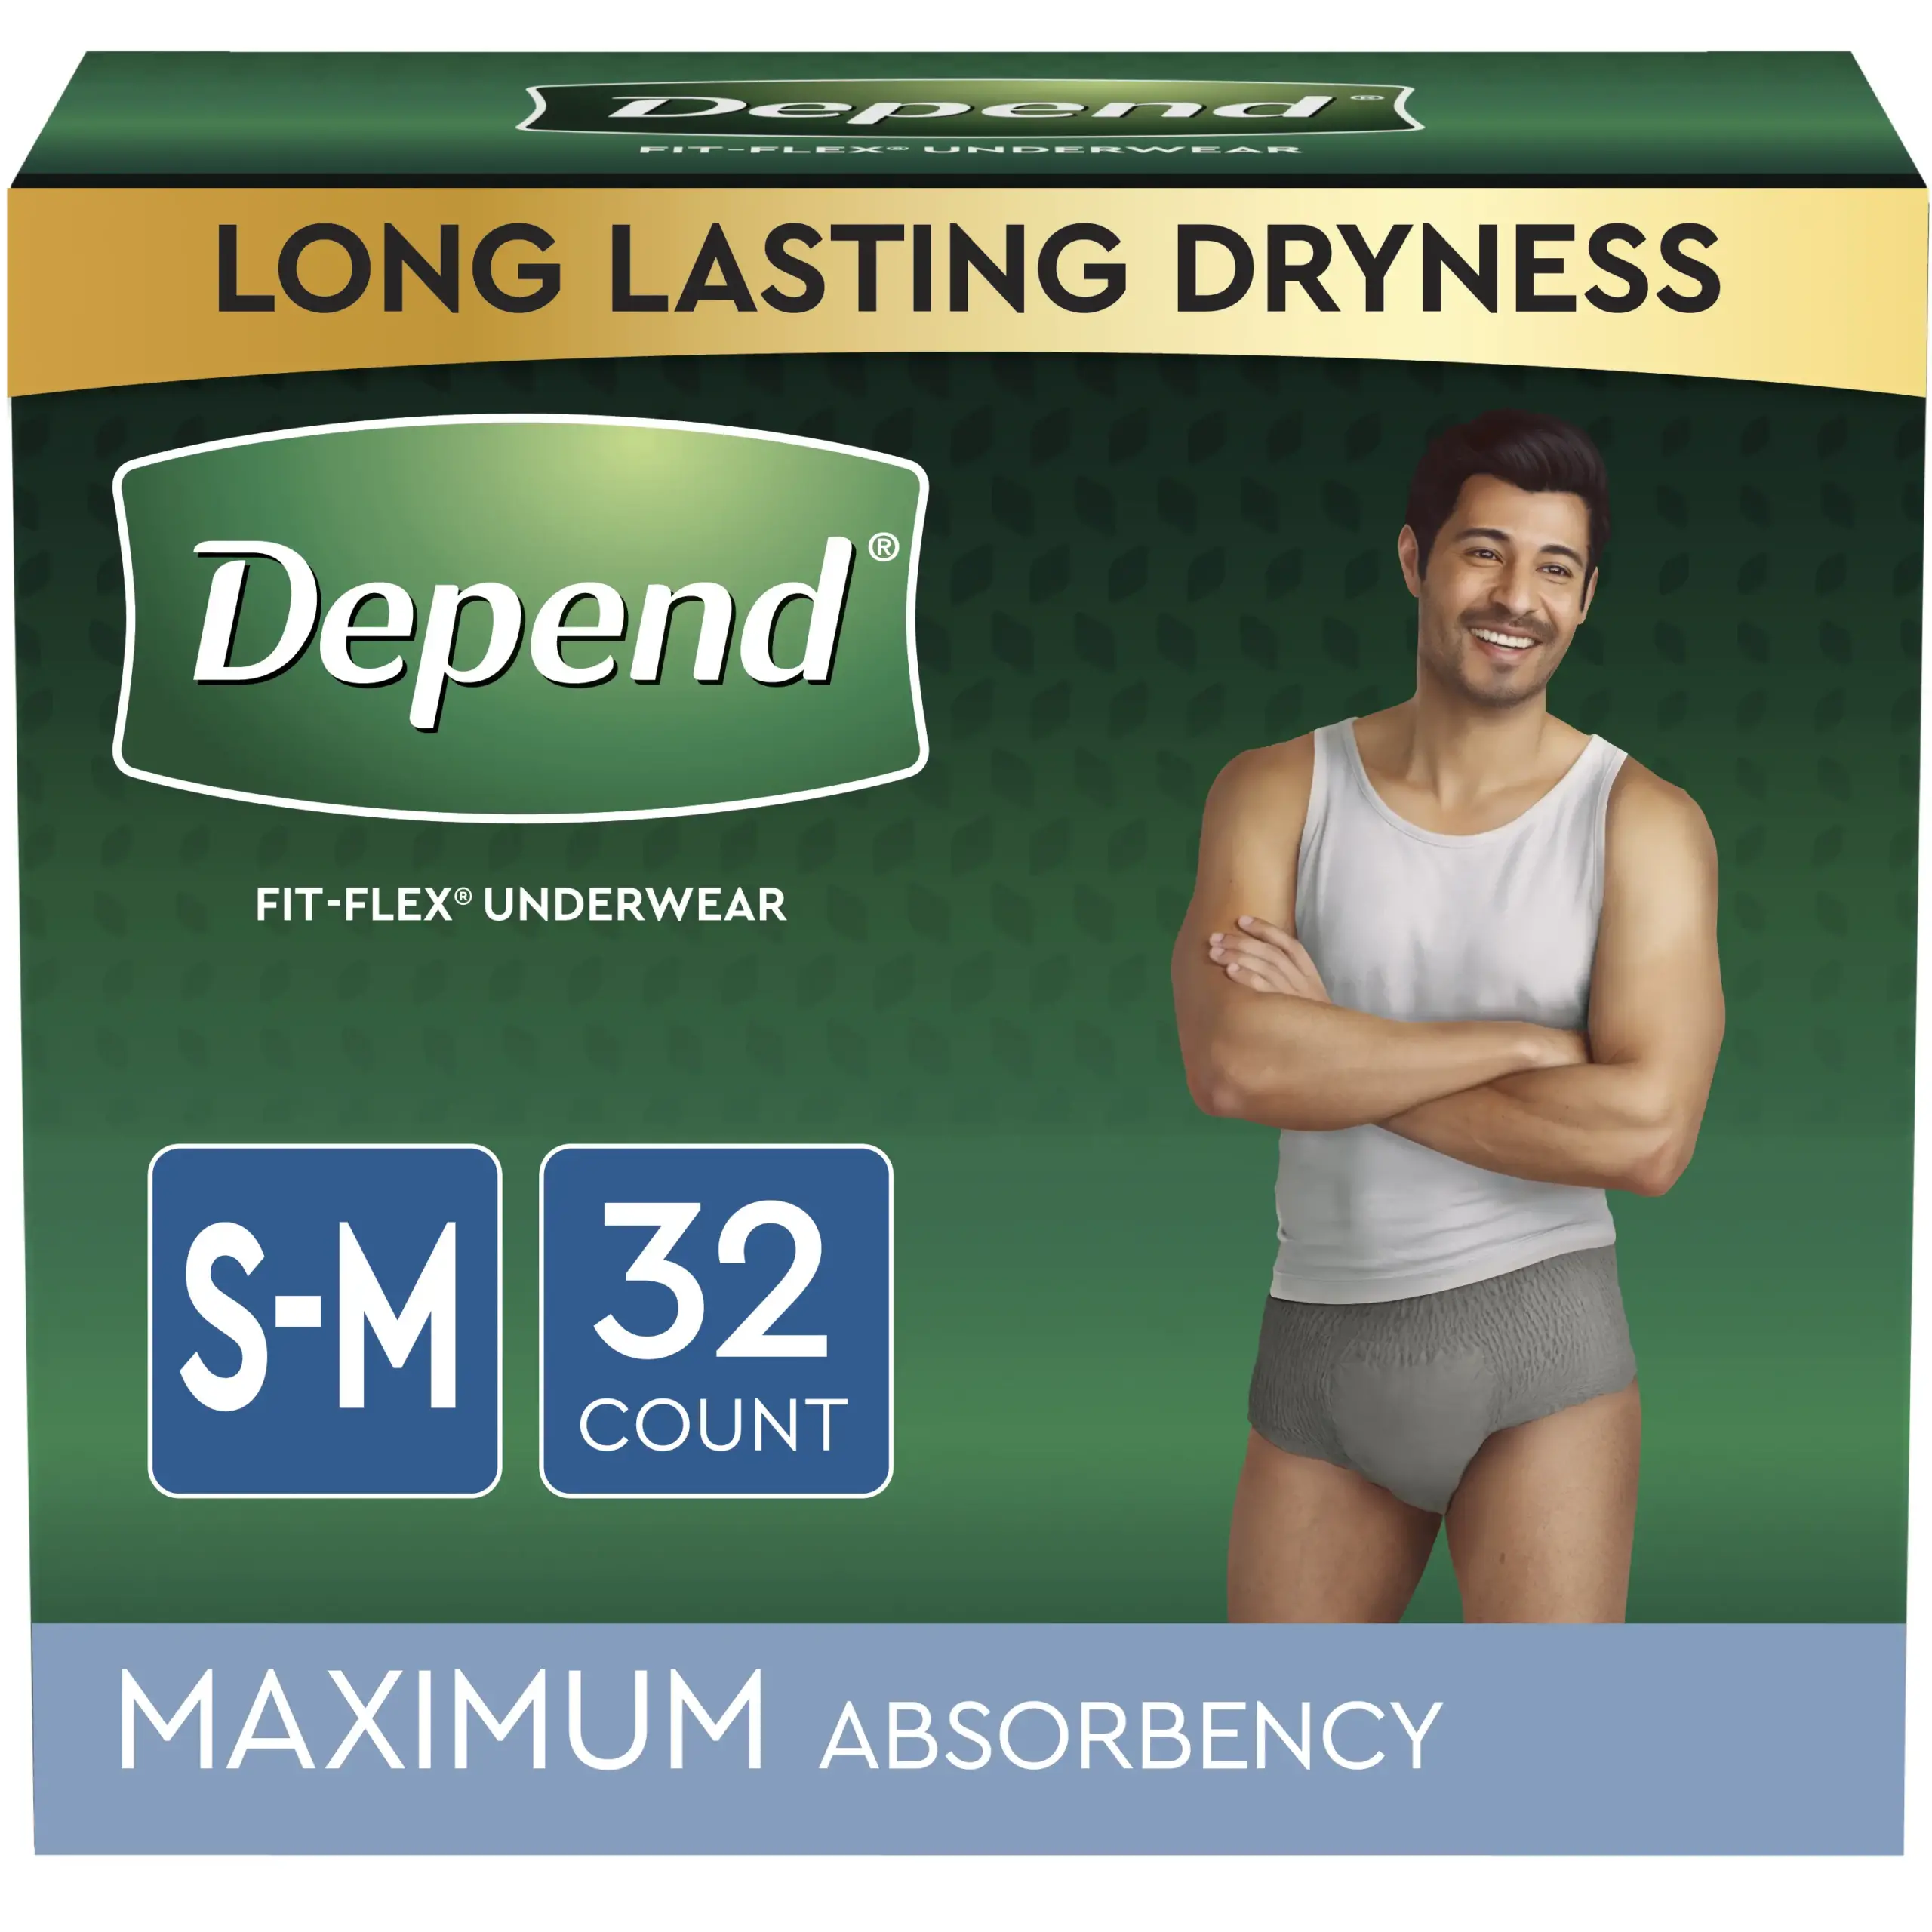 Depend FIT-FLEX Incontinence Underwear for Men, Maximum Absorbency, Small/Medium, Gray, 32 Count, Replaces Item 6912539